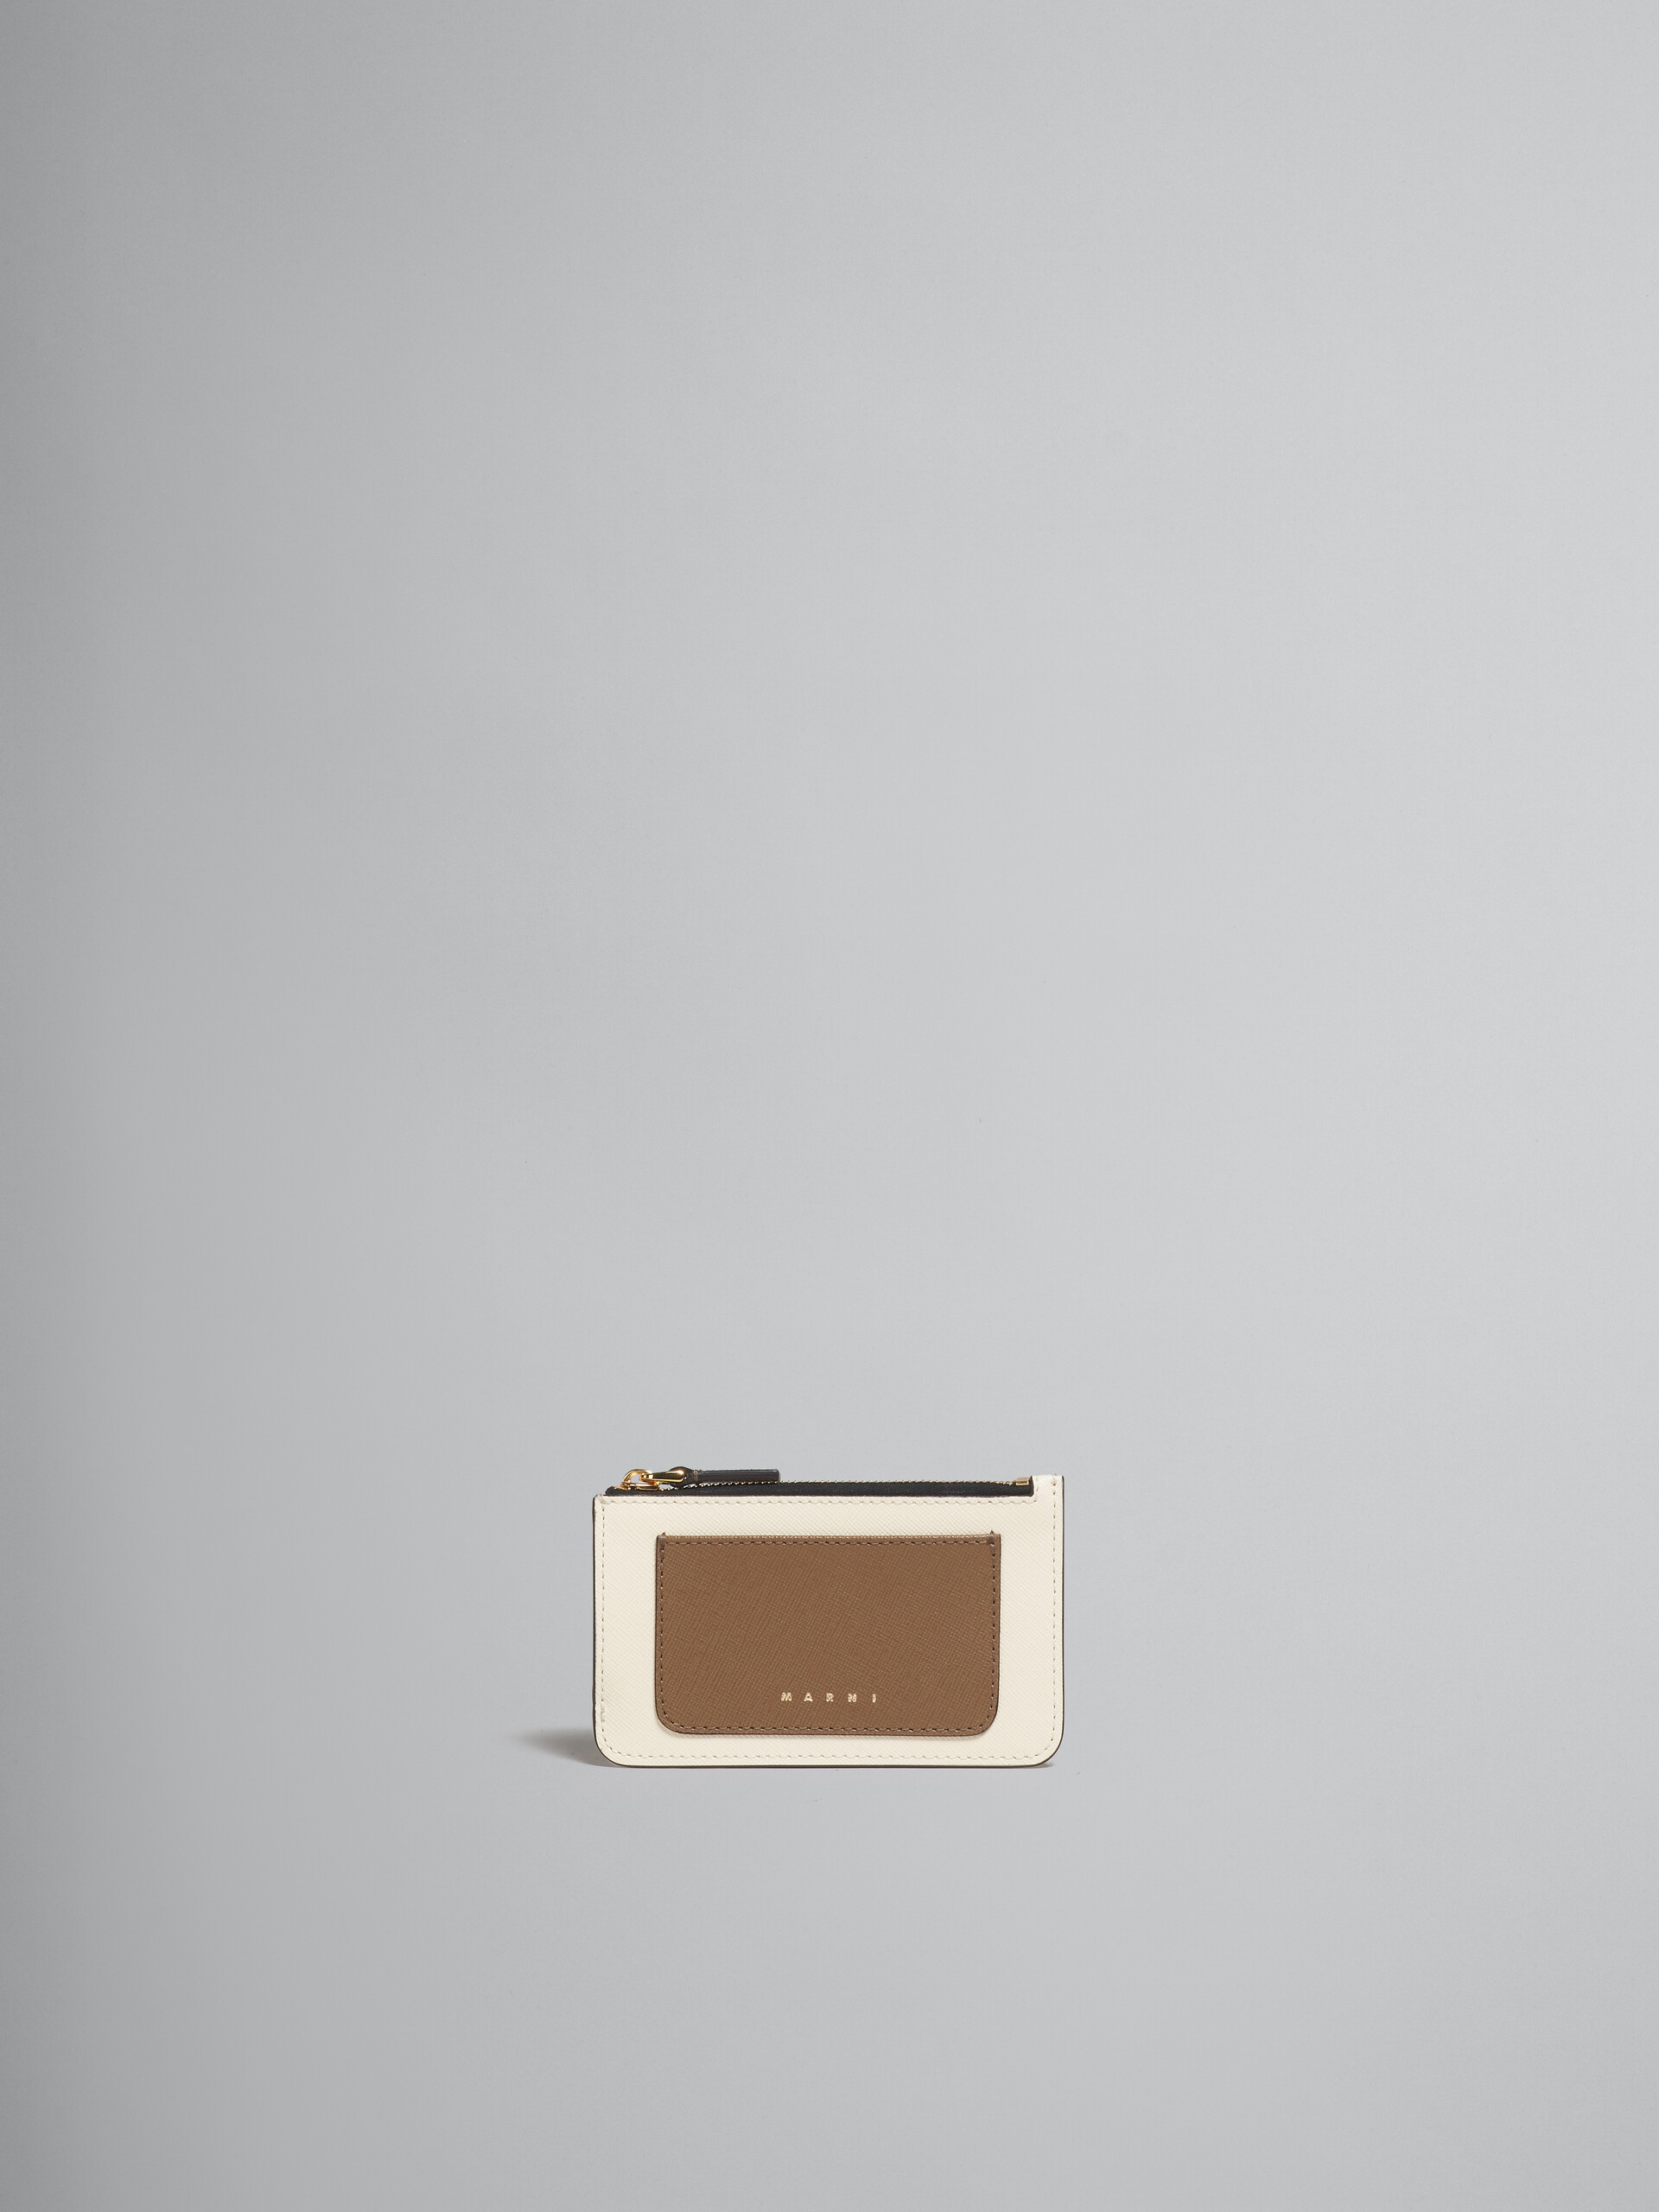 Light green white and brown saffiano leather card case - Wallets - Image 1